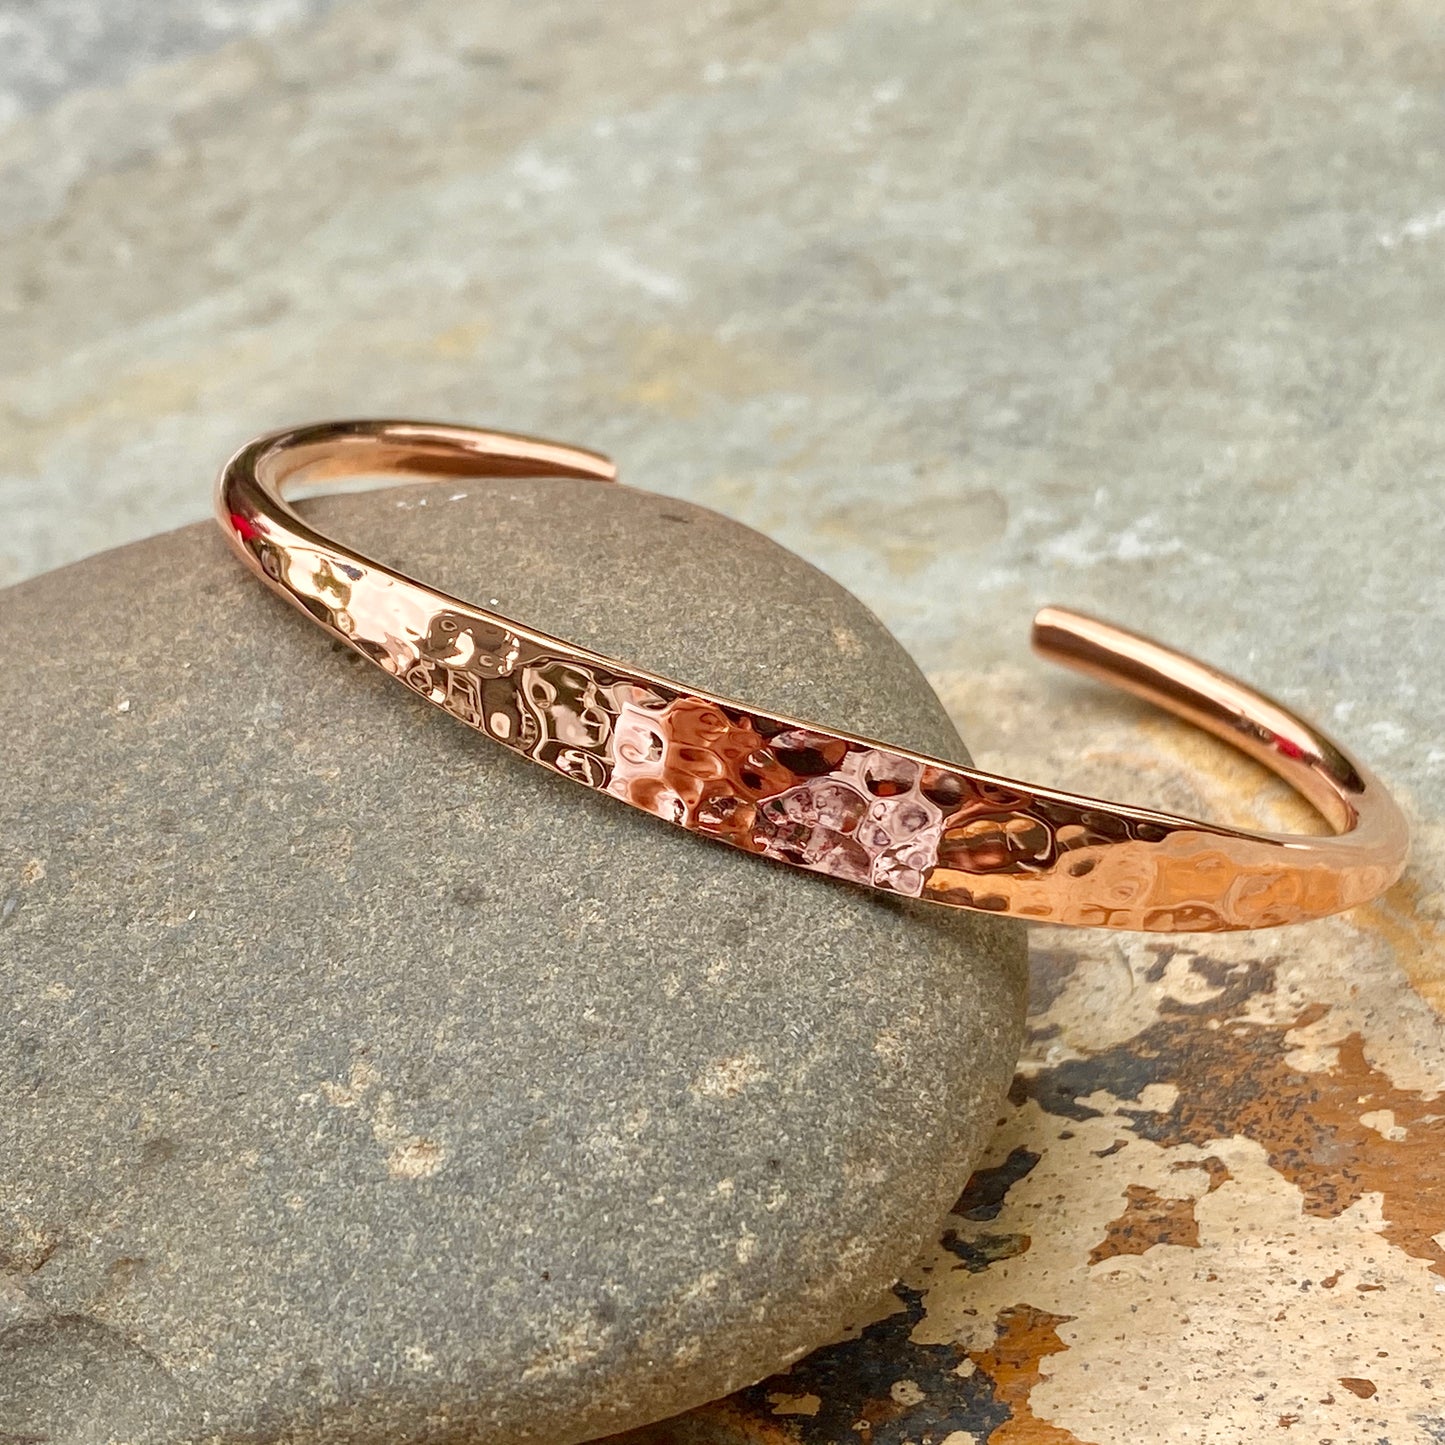 Copper Hammered Tapered Cuff Bangle Bracelet 6.6mm, Copper Hammered Tapered Cuff Bangle Bracelet 6.6mm - Legacy Saint Jewelry